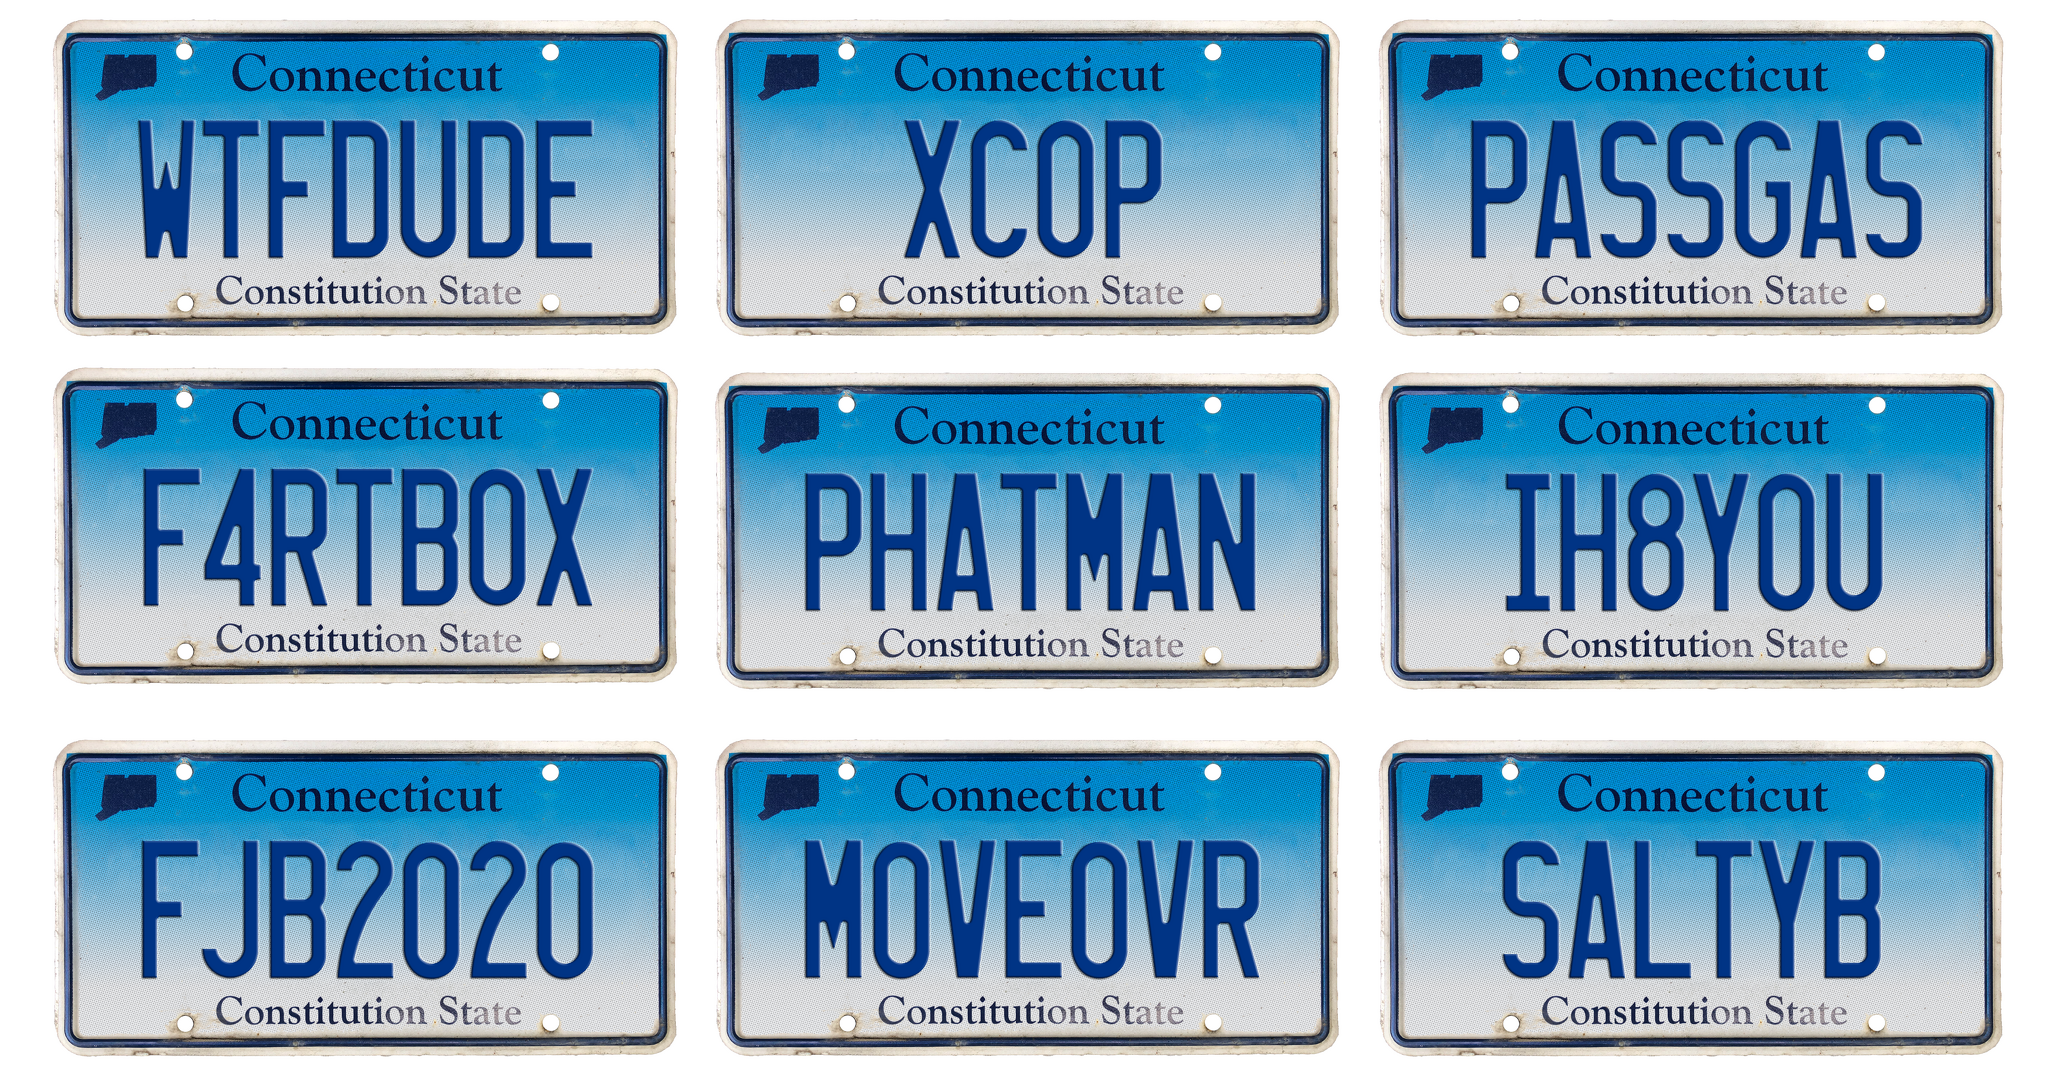 These vanity license plates were rejected by Connecticuts